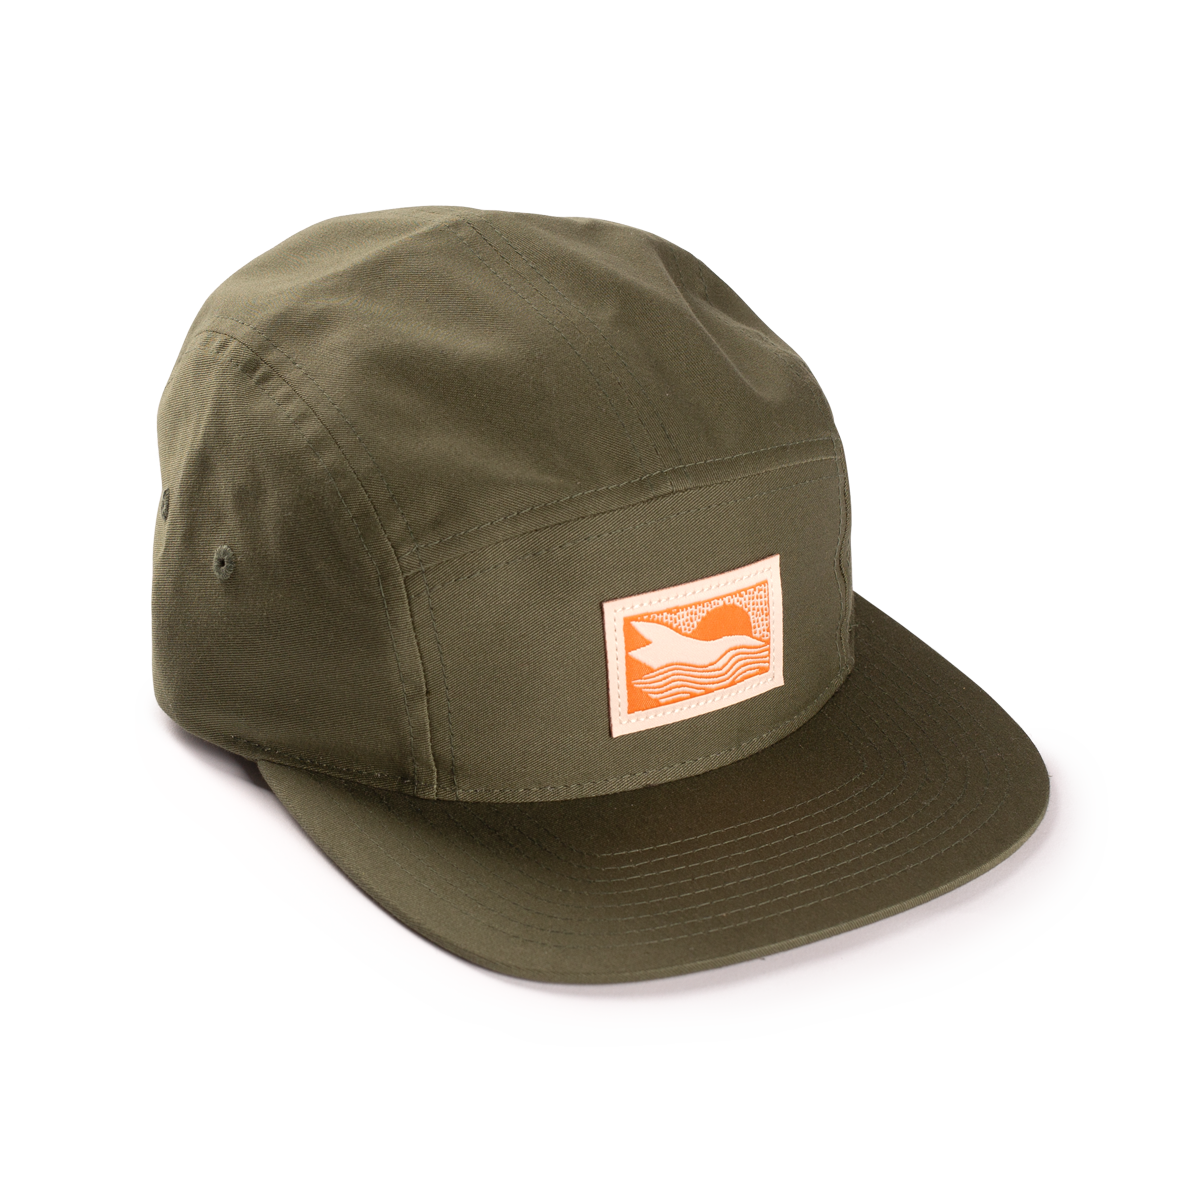 Tender Loving Empire - Abstract Landscape 5 Panel Hat (Cotton - Green)